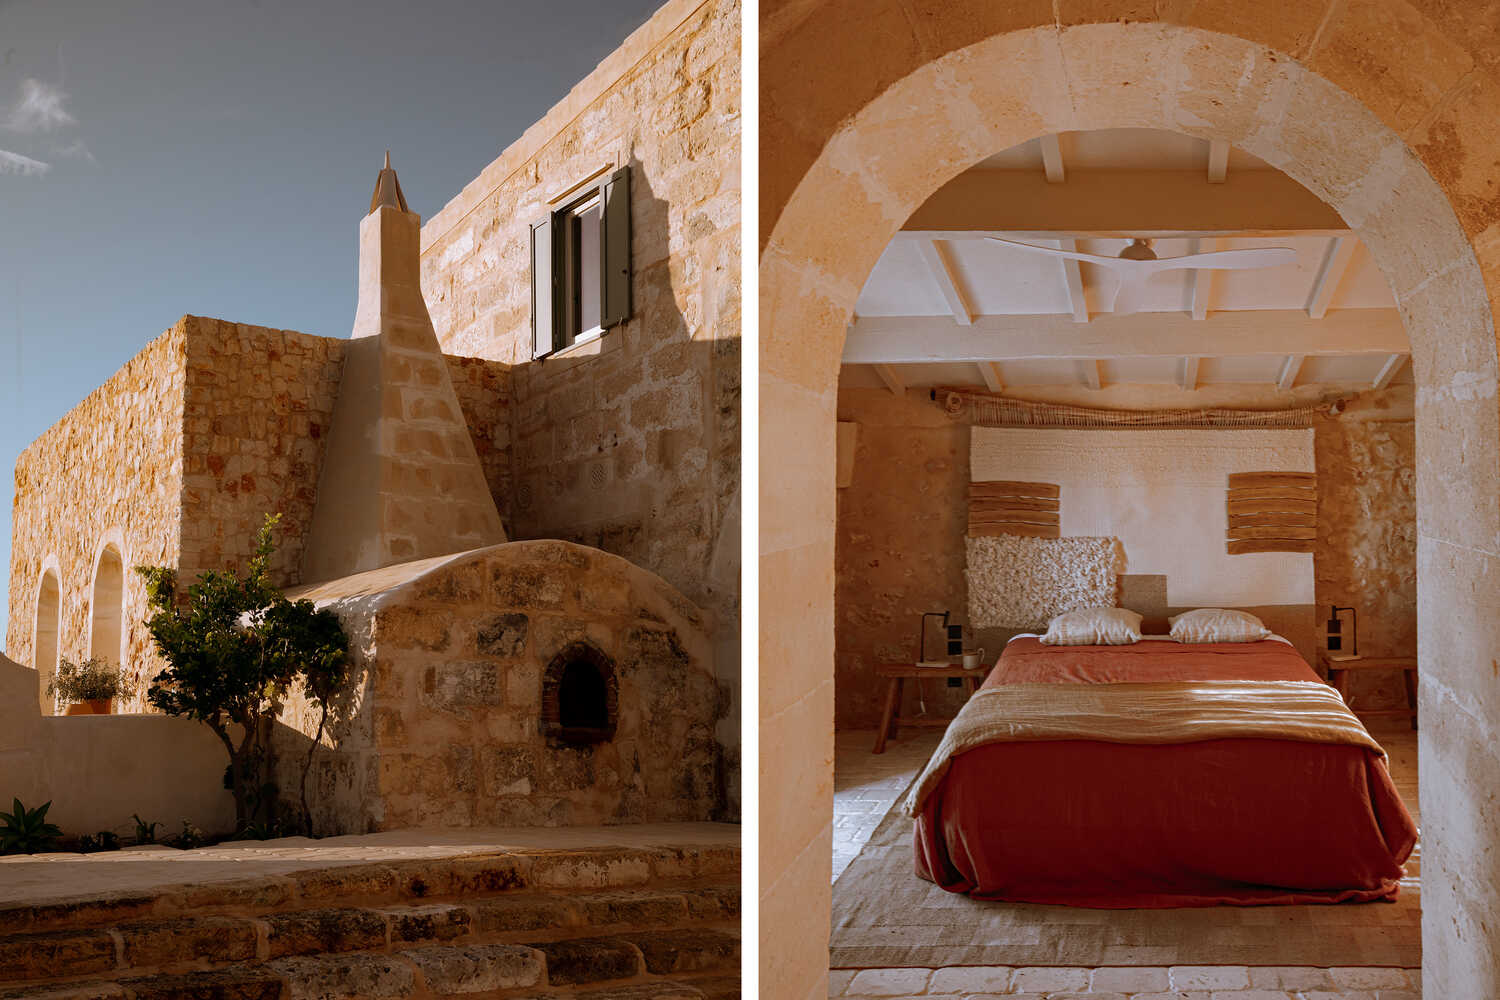 It took five years for the hotelier Benedicta Linares Pearce, a Minorca native, and her husband, Benoît Pellegrini, to restore what is now Son Blanc Farmhouse, a 19th-century limestone farmhouse with 14 suites featuring specially commissioned works by Spanish artists.